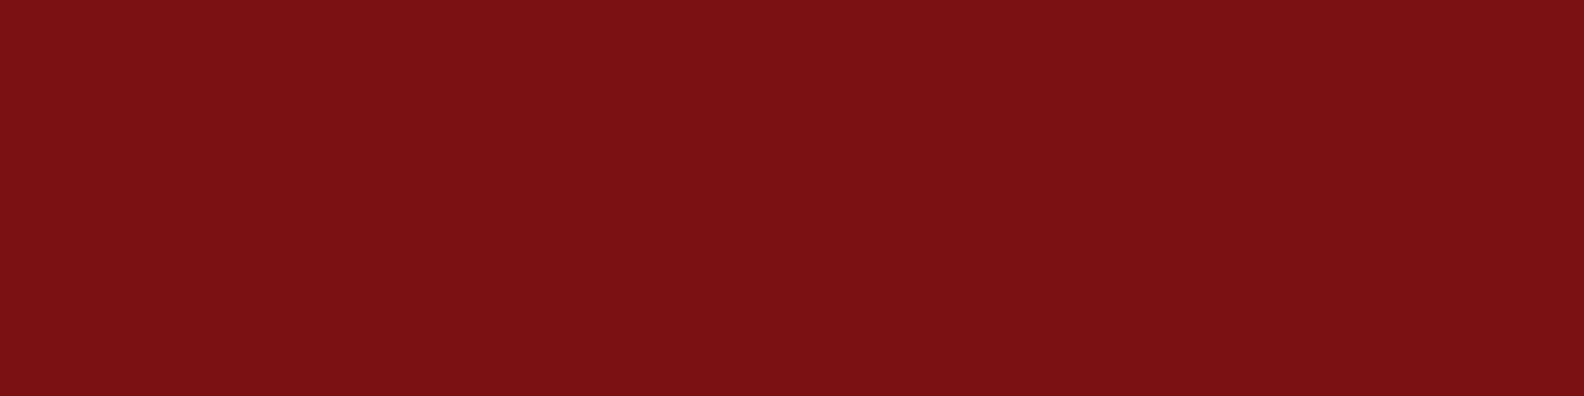 1584x396 UP Maroon Solid Color Background